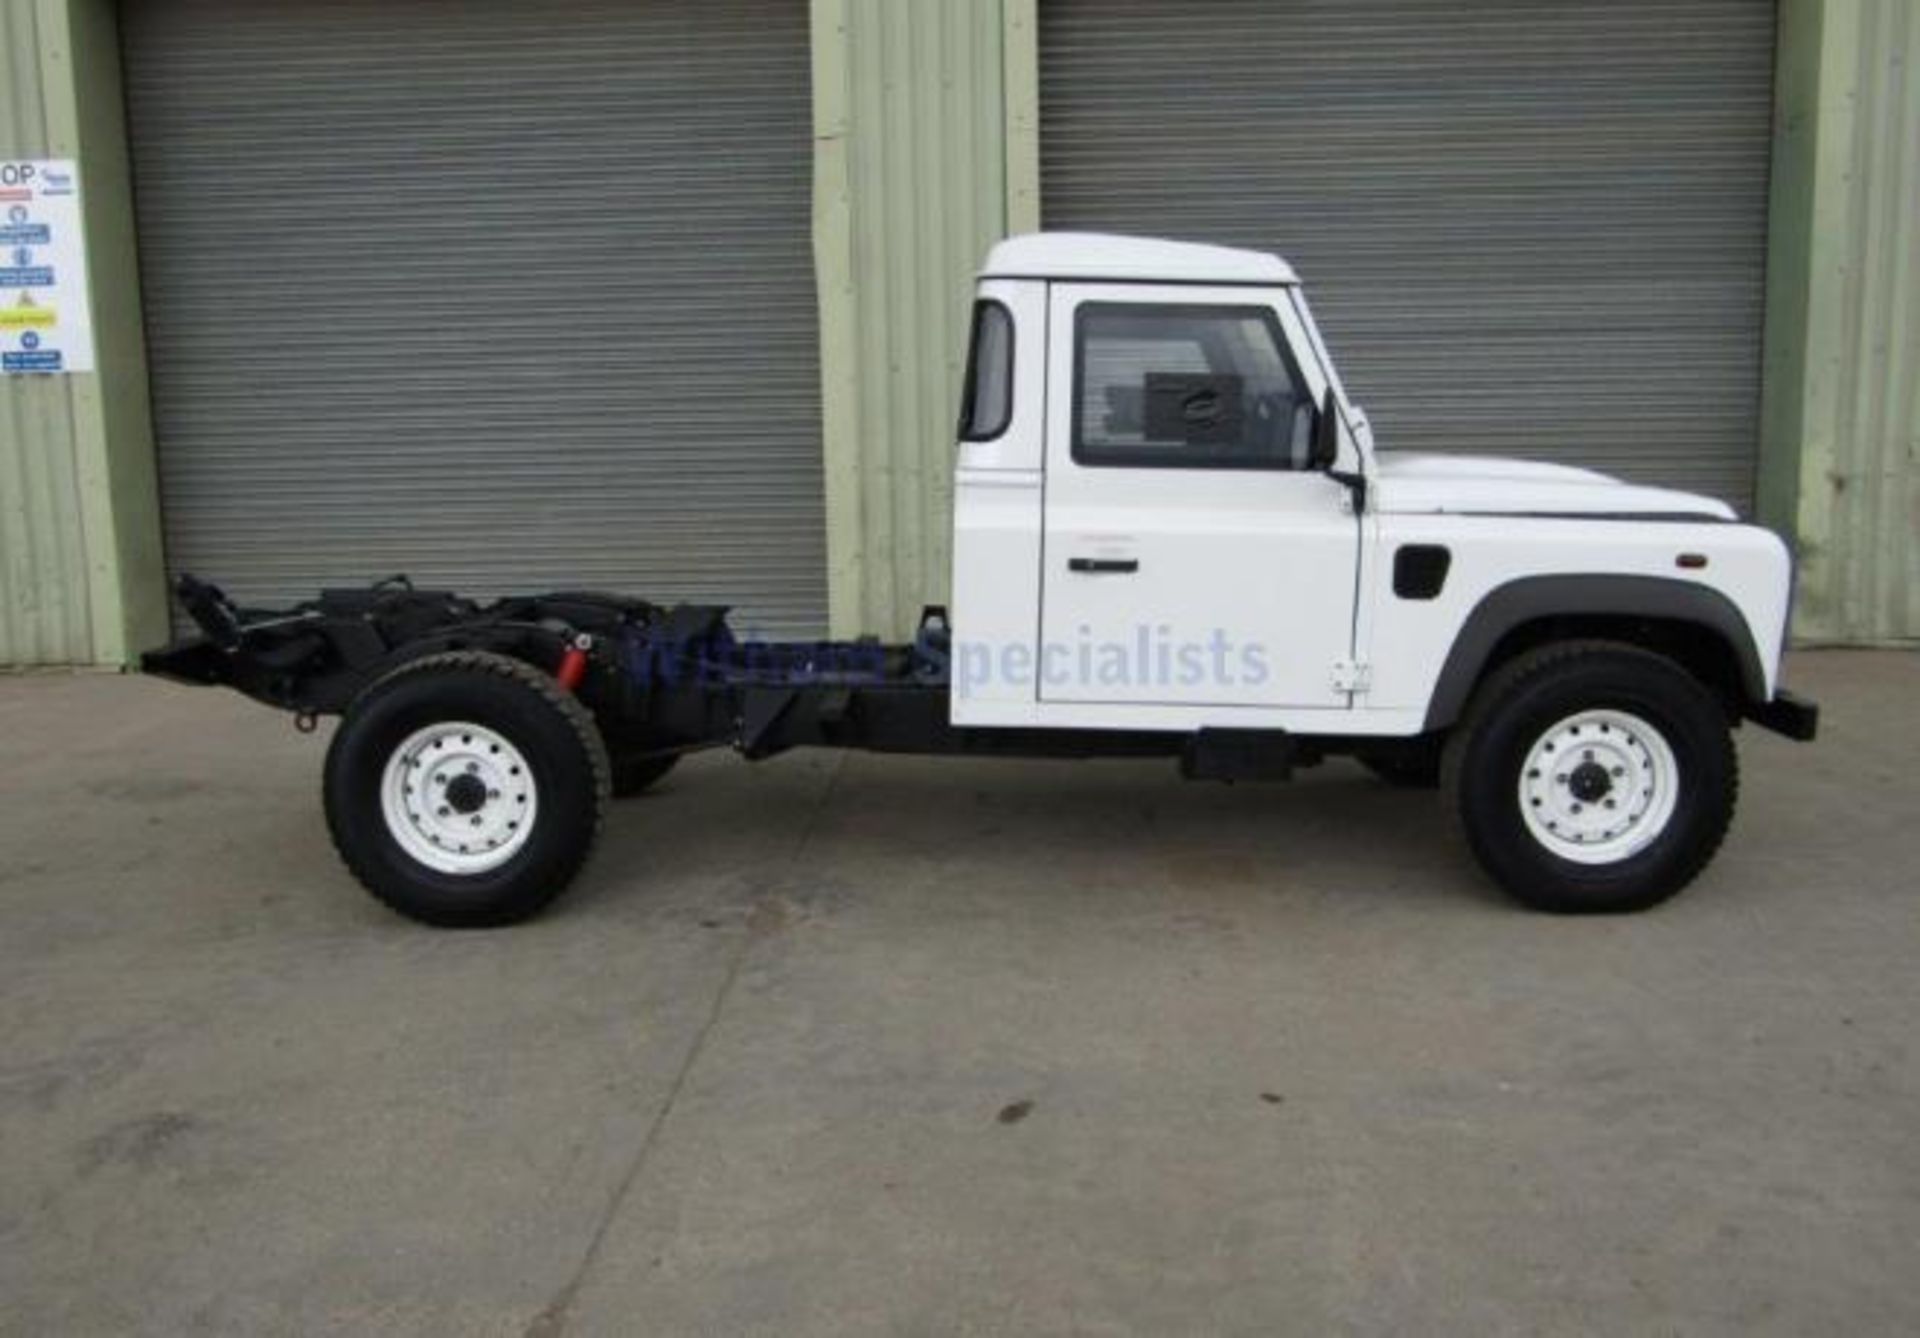 NEW UNUSED Export Specification Land Rover Defender Armoured 130 Chassis Cab - Bild 4 aus 19